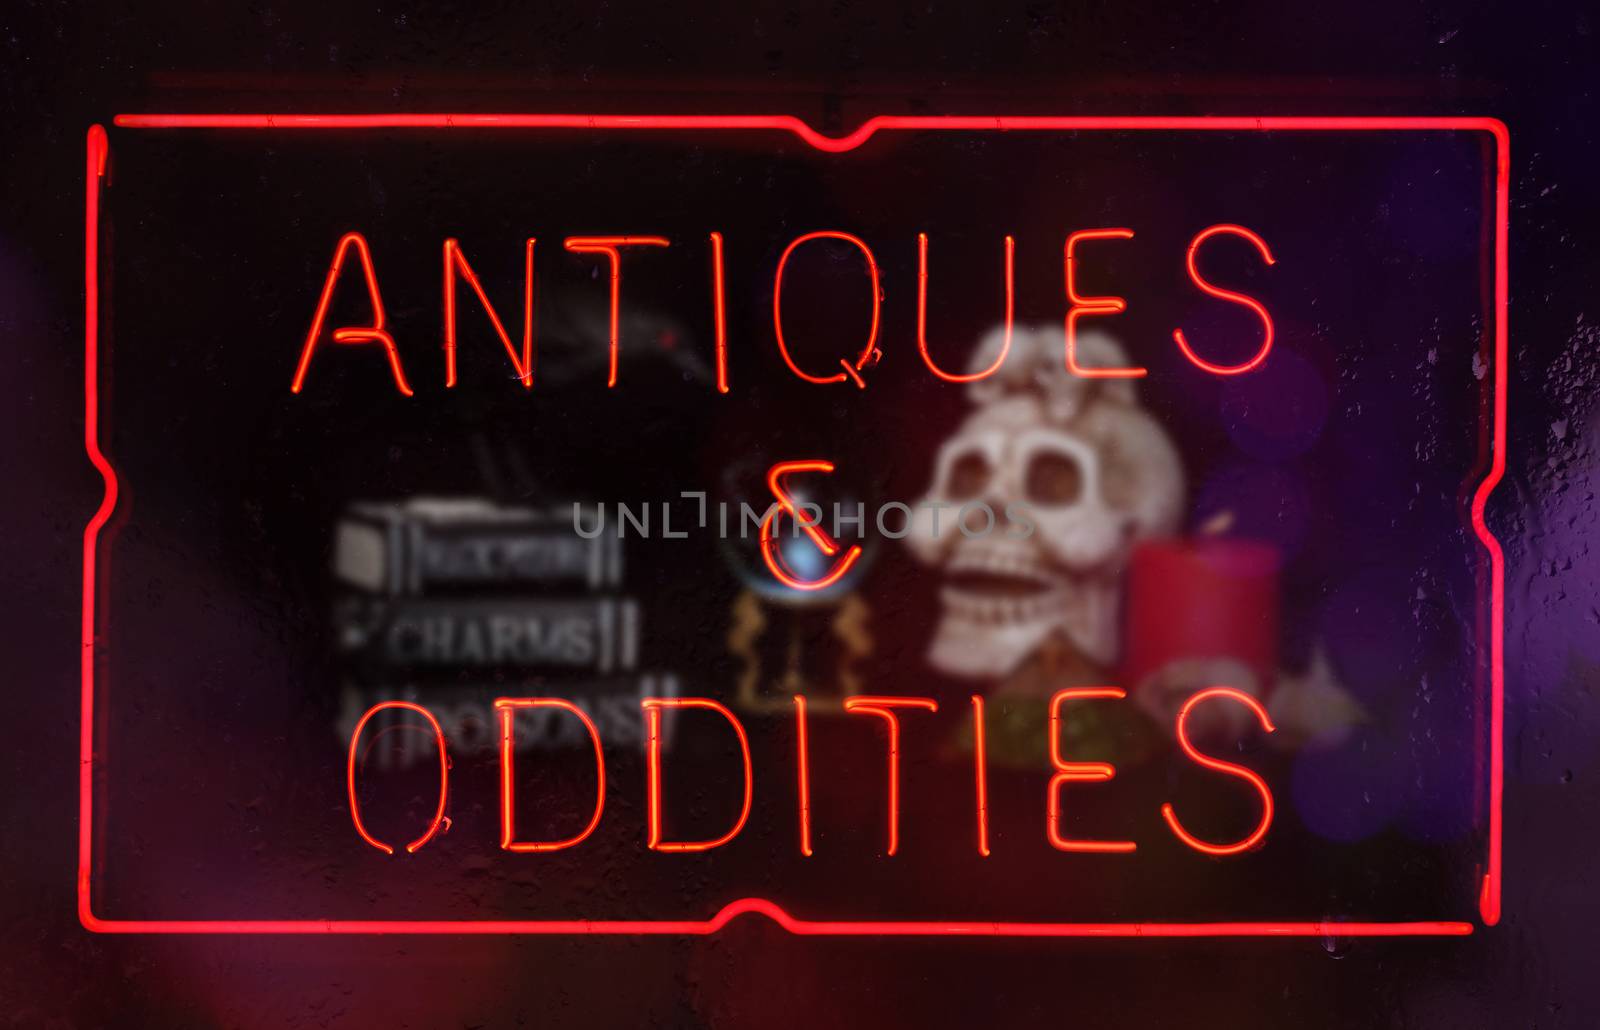 Oddities and Antiques Neon Sign in Shop Window by Marti157900